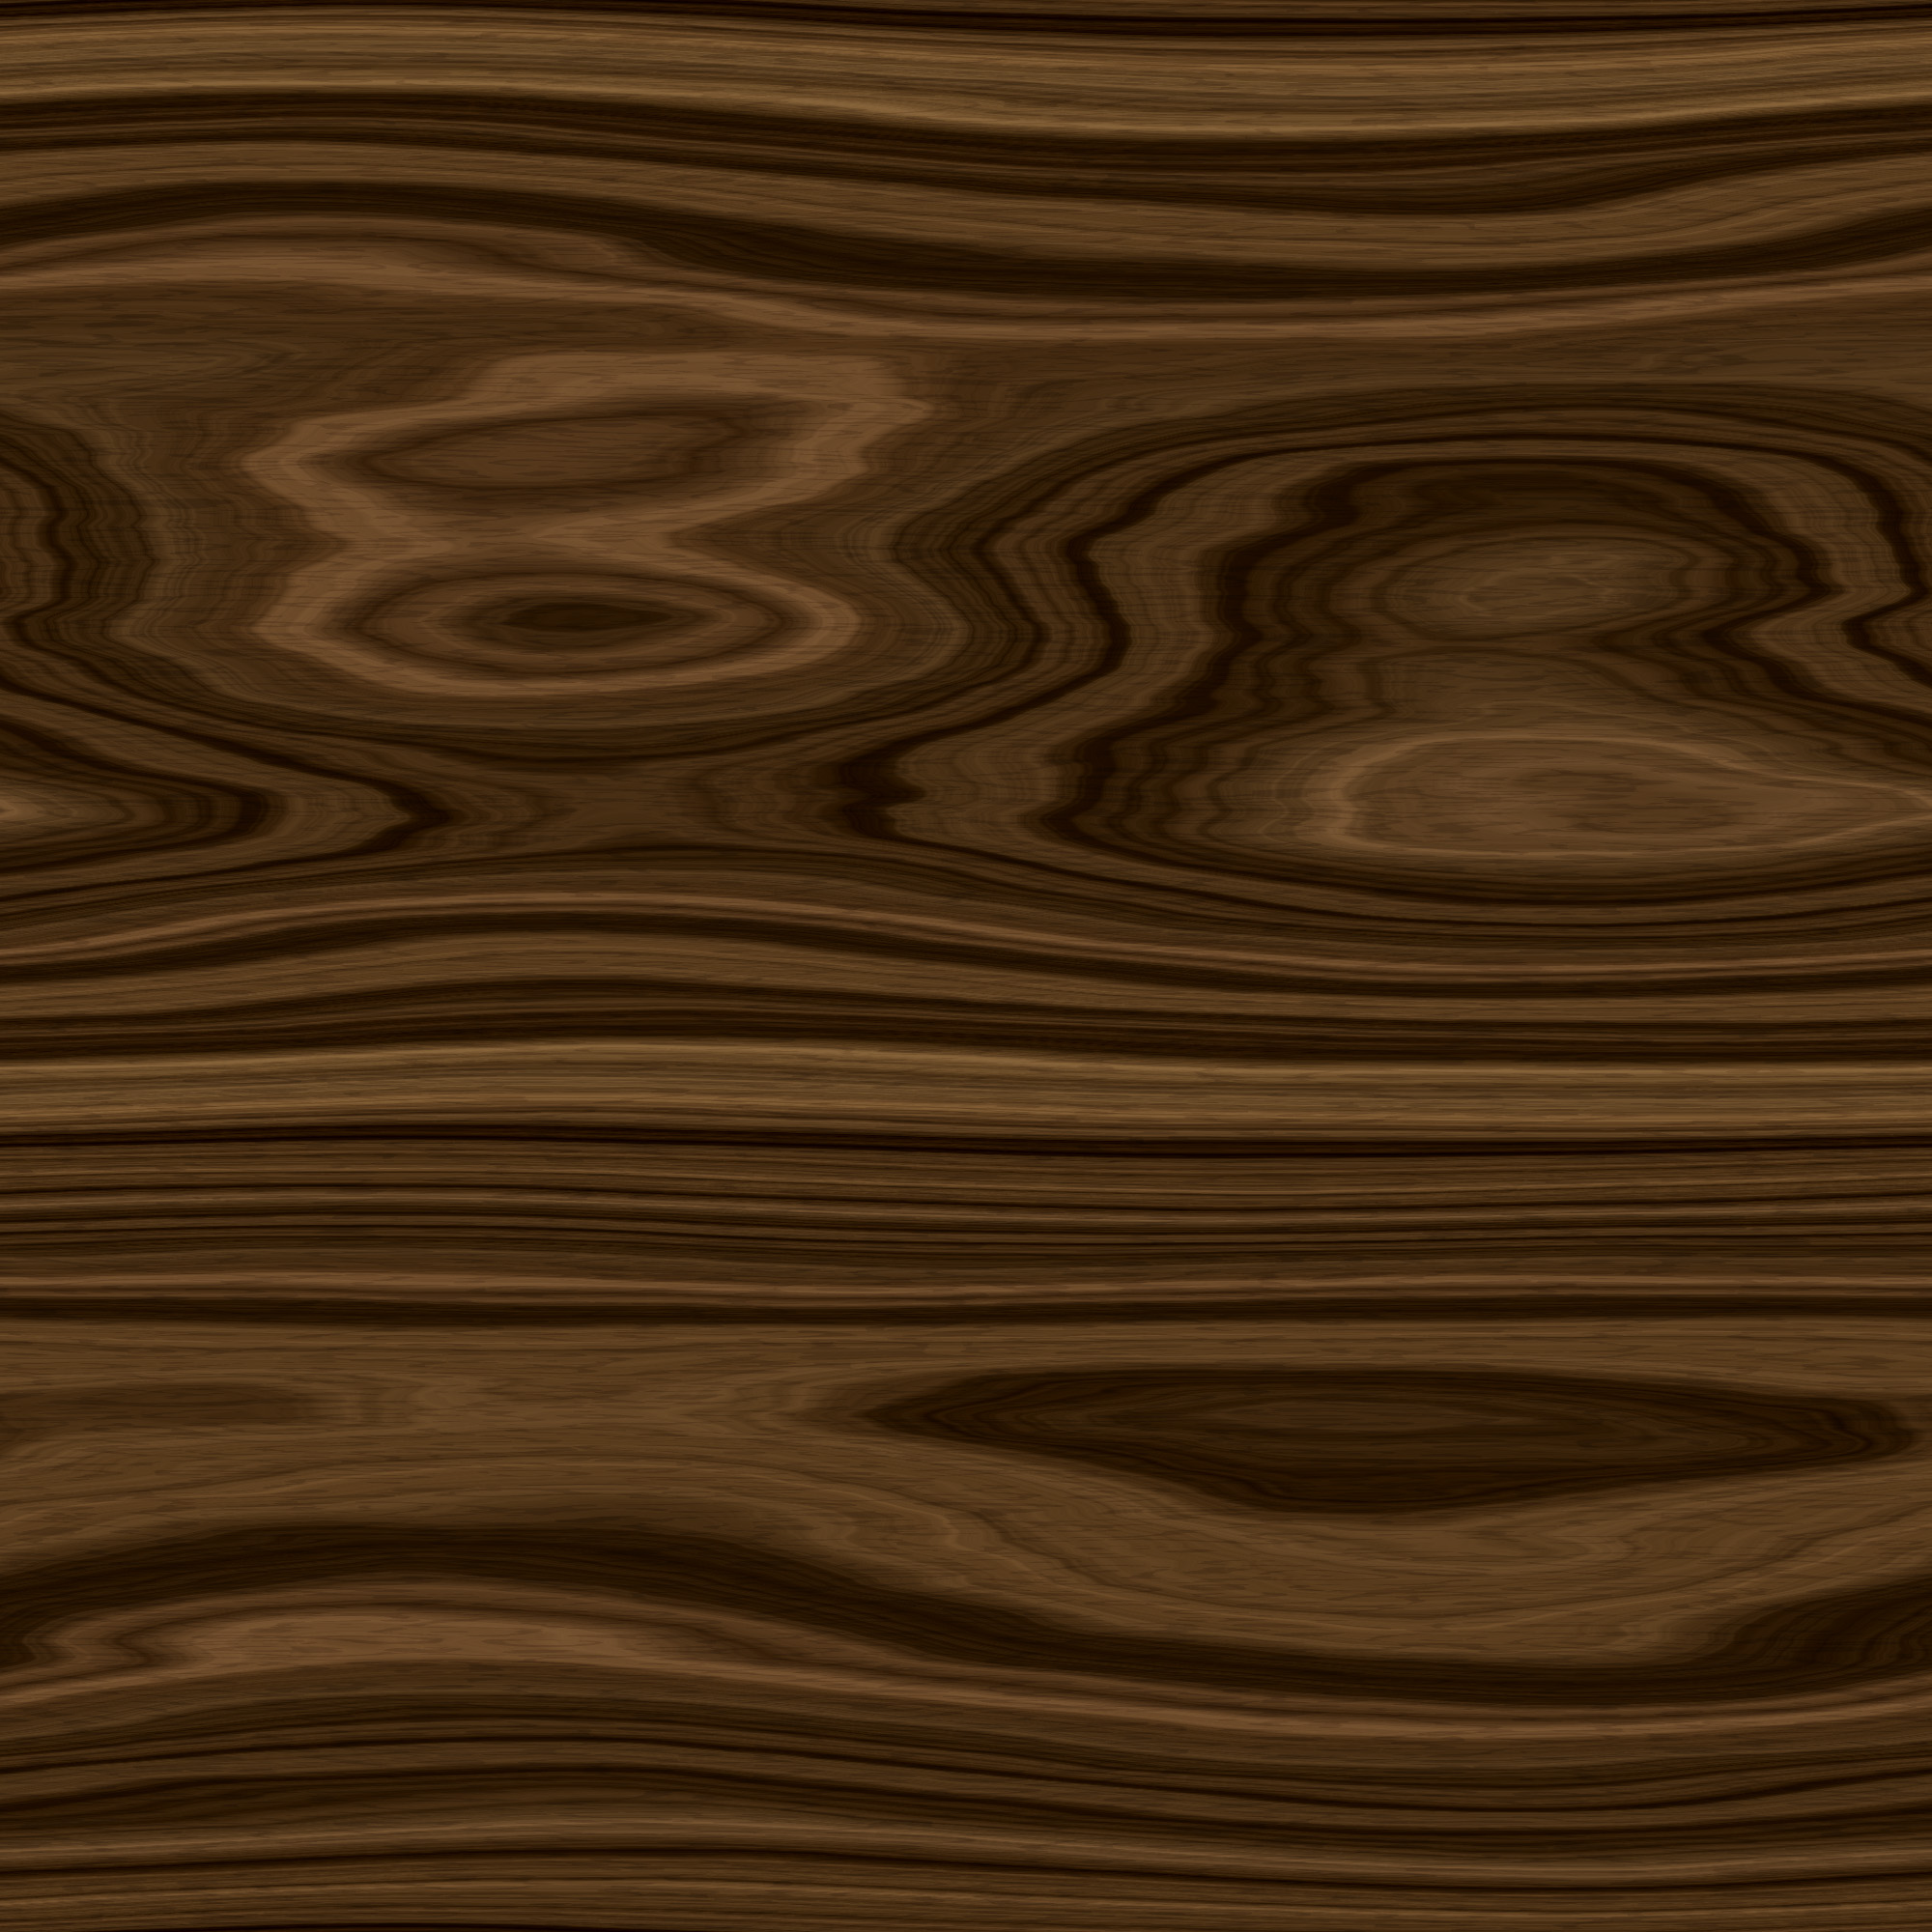 Wood patterns on this seamless wooden background | www.myfreetextures